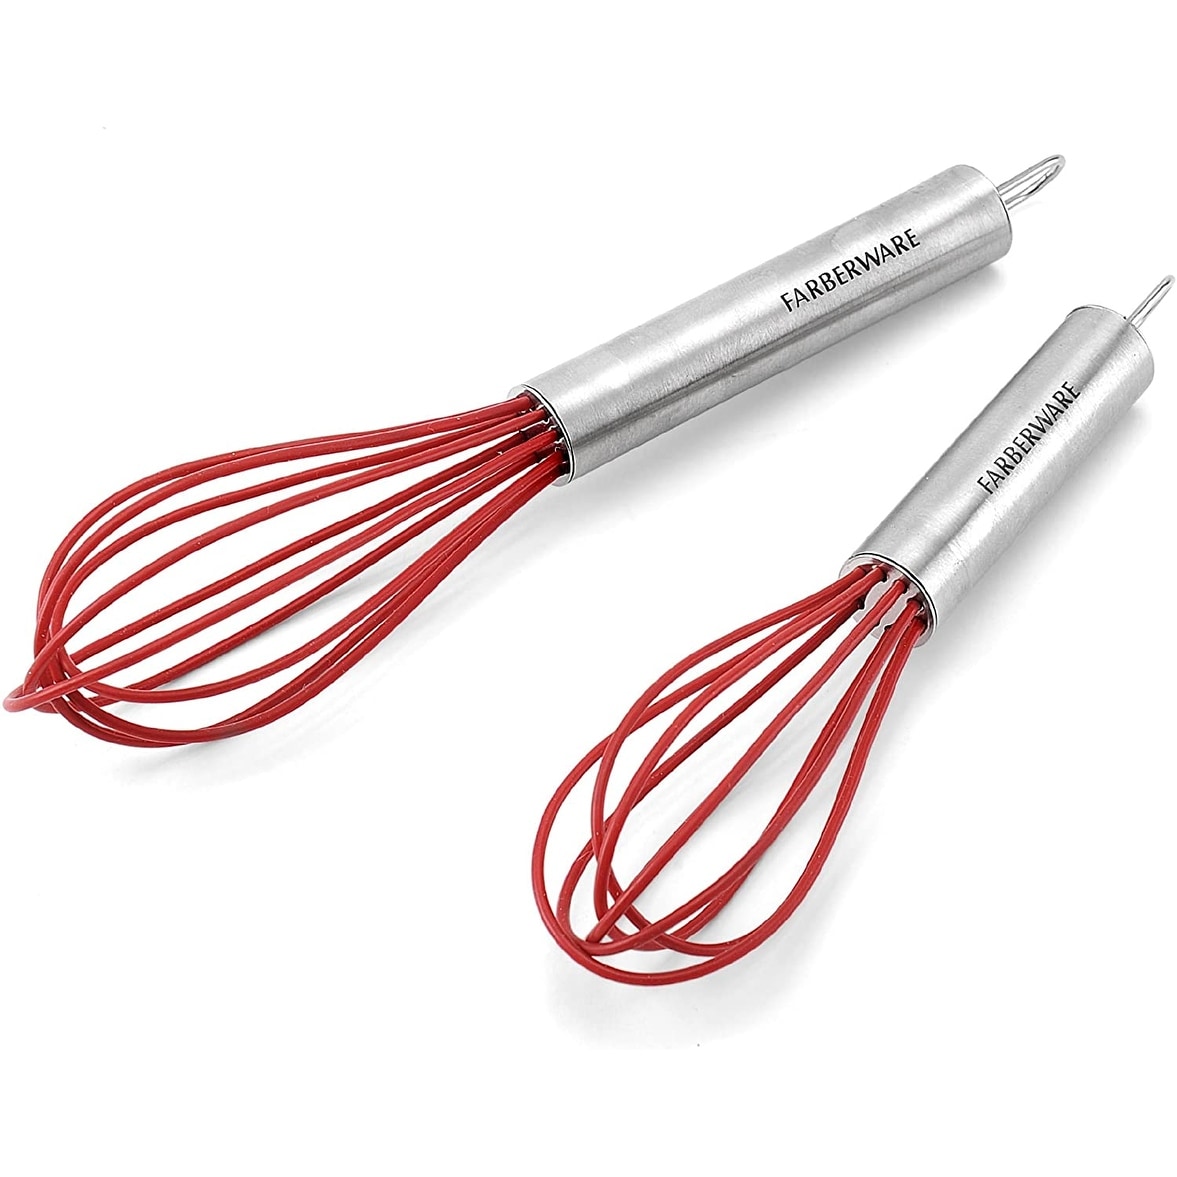 https://ak1.ostkcdn.com/images/products/is/images/direct/4b1e19f452401ca5855b57f94f31b8b2aa3fbf1b/Farberware-Professional-Silicone-Mini-Whisks%2C-Set-of-2.jpg